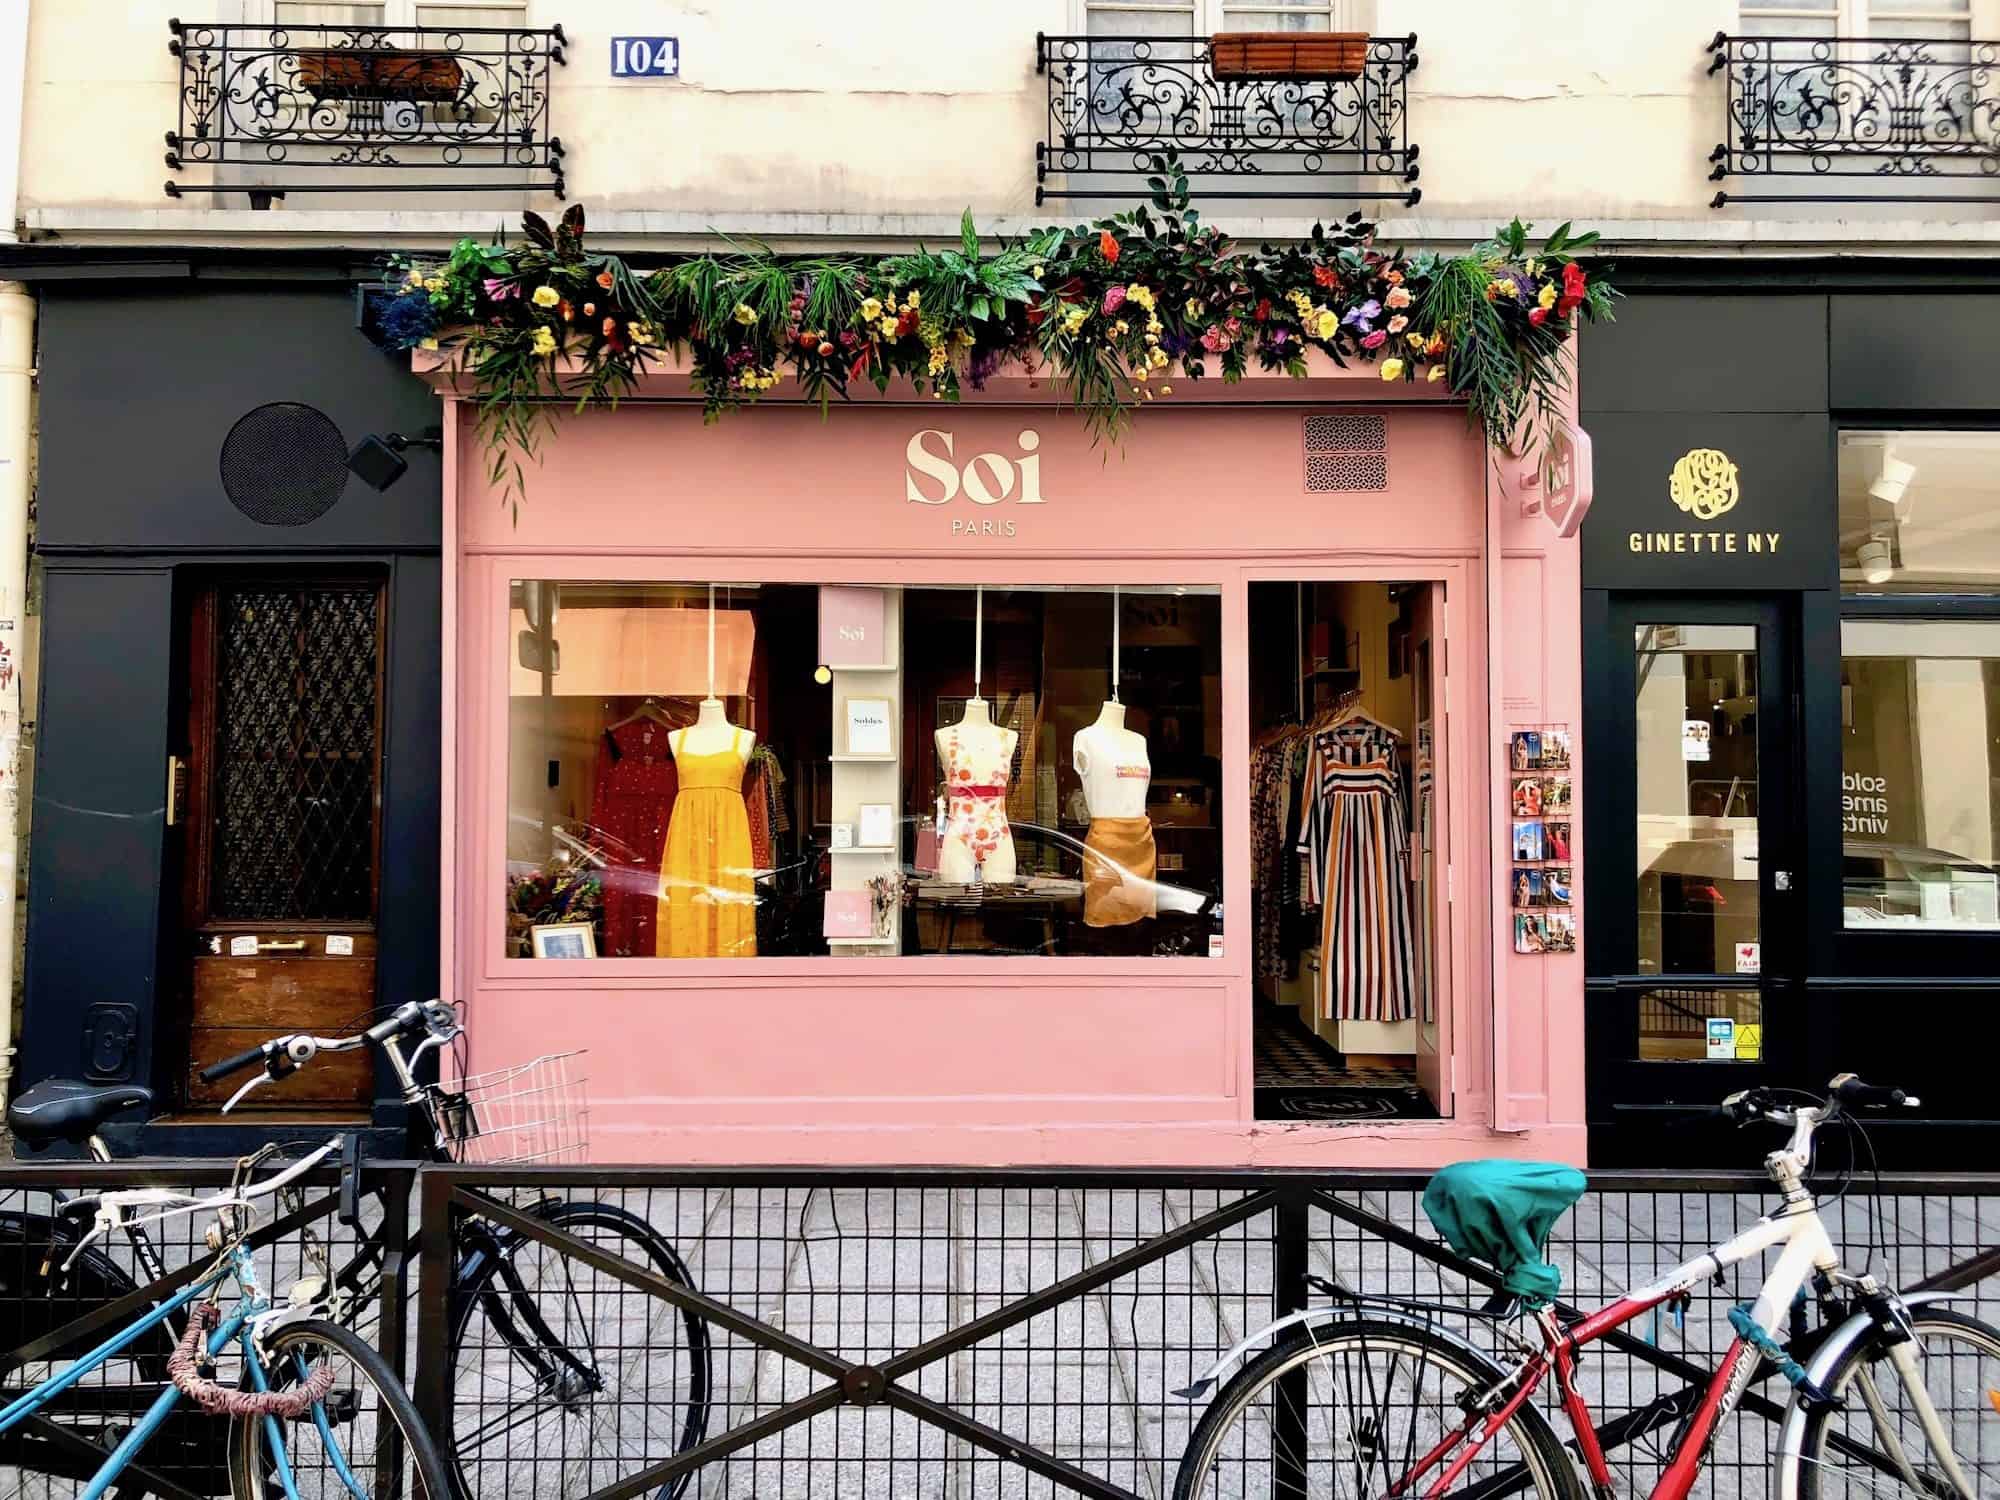 The pink store front of French fashion brand we love, Soi, in Paris.